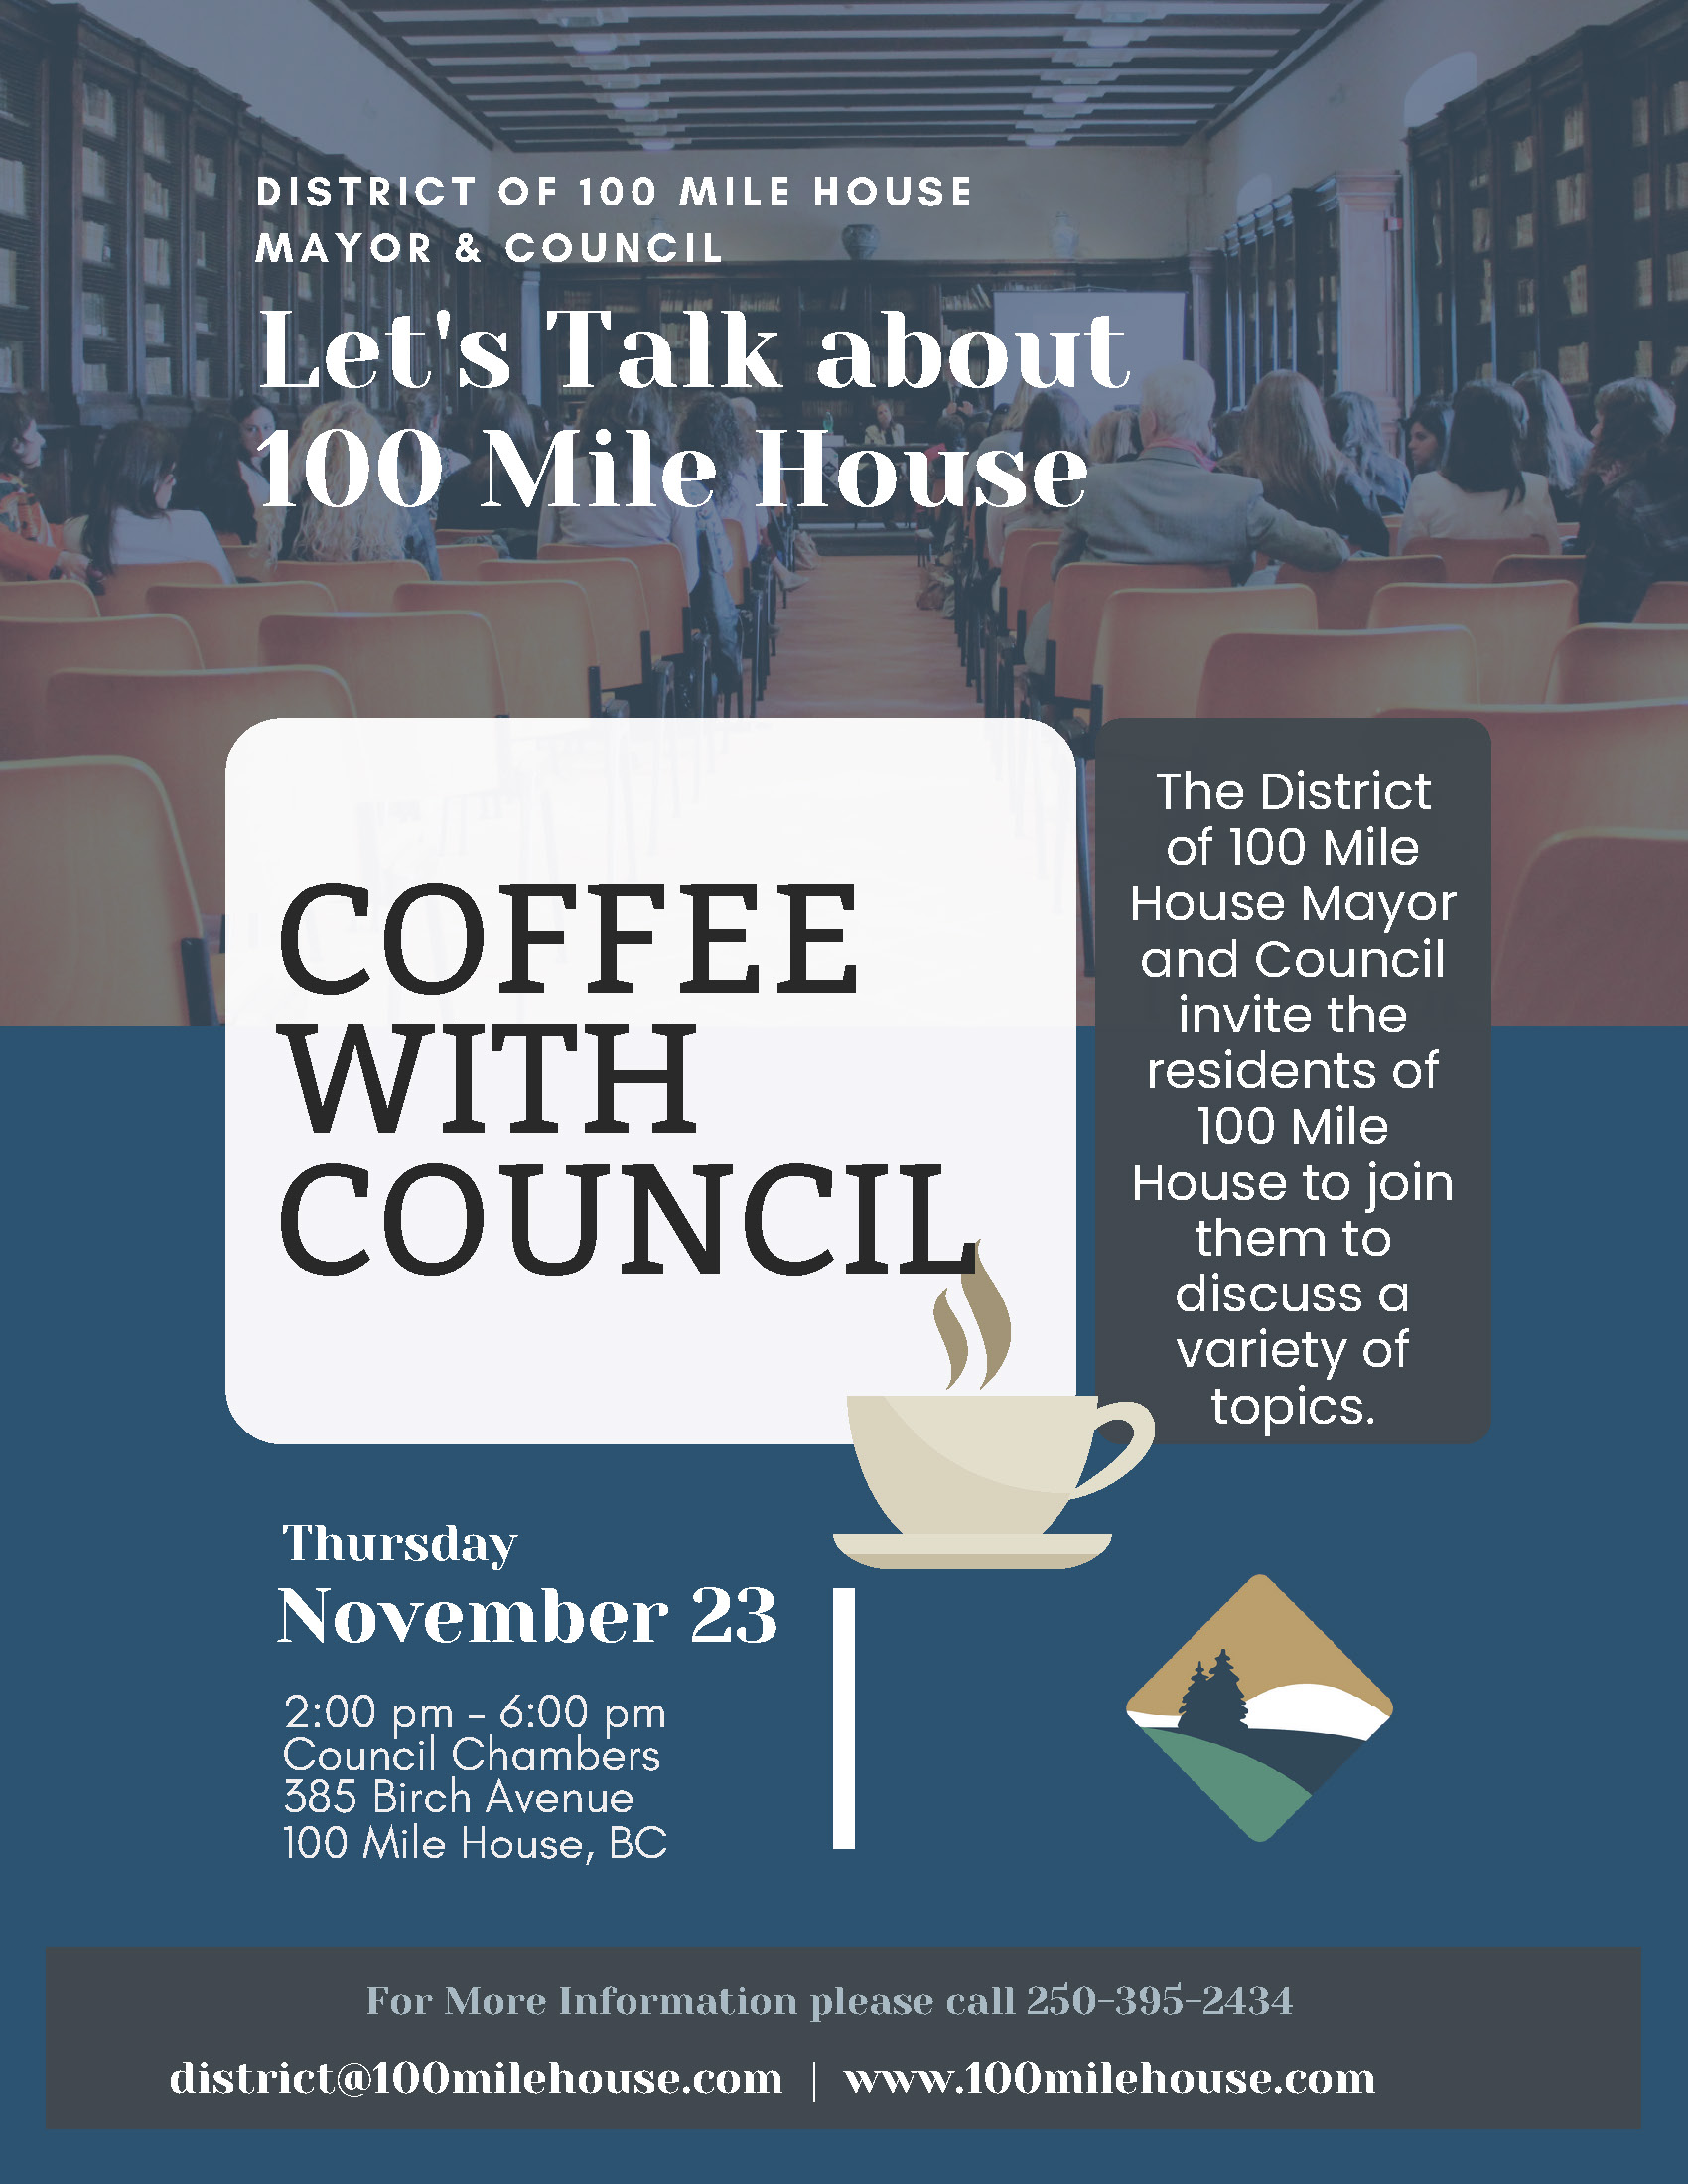 Coffee with Council - November 23rd